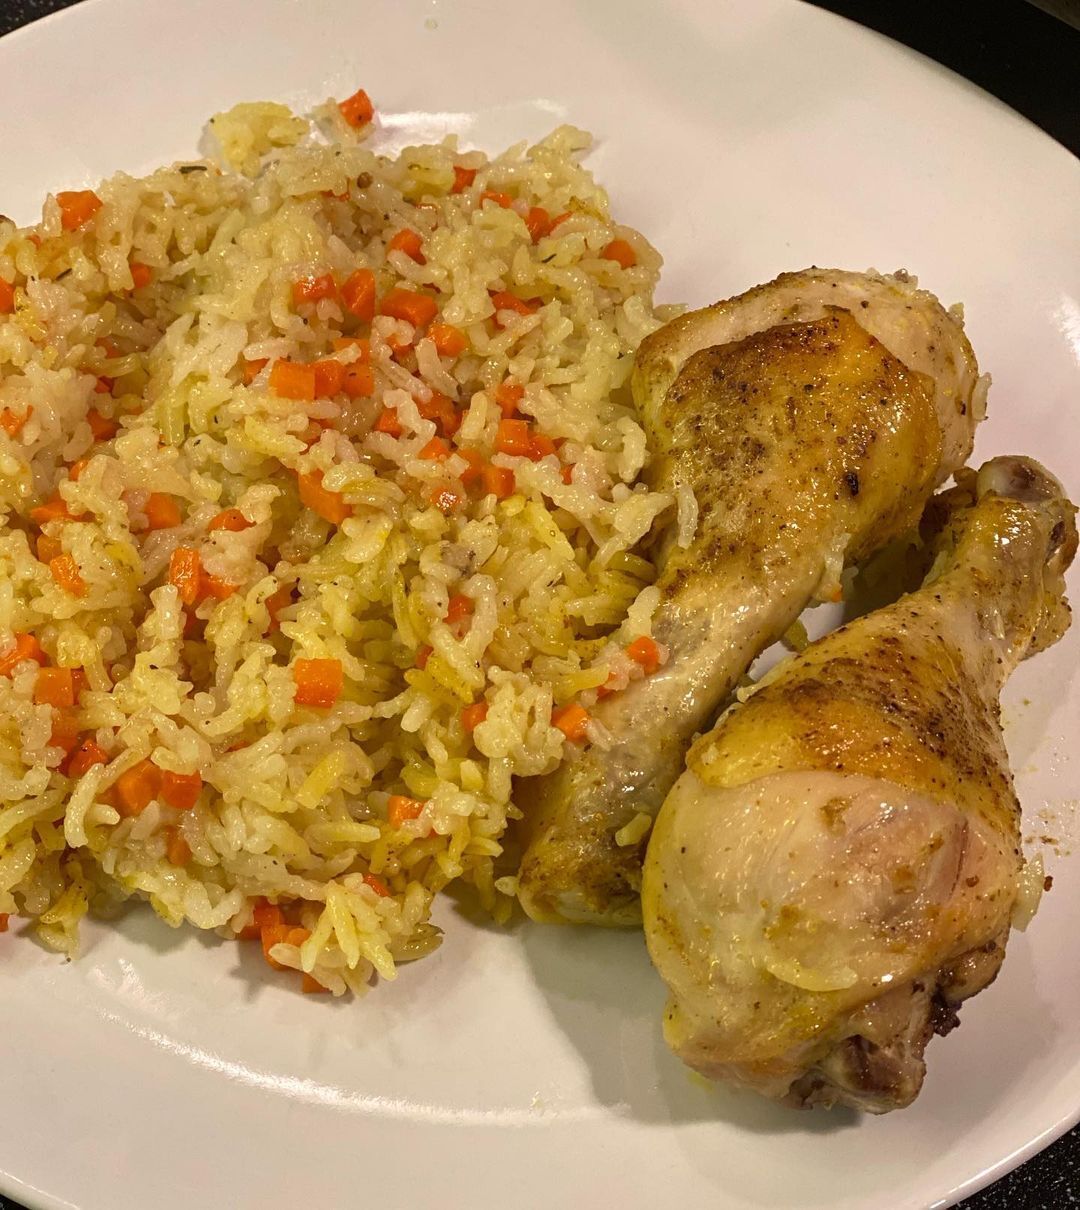 Rice with chicken for lunch and dinner